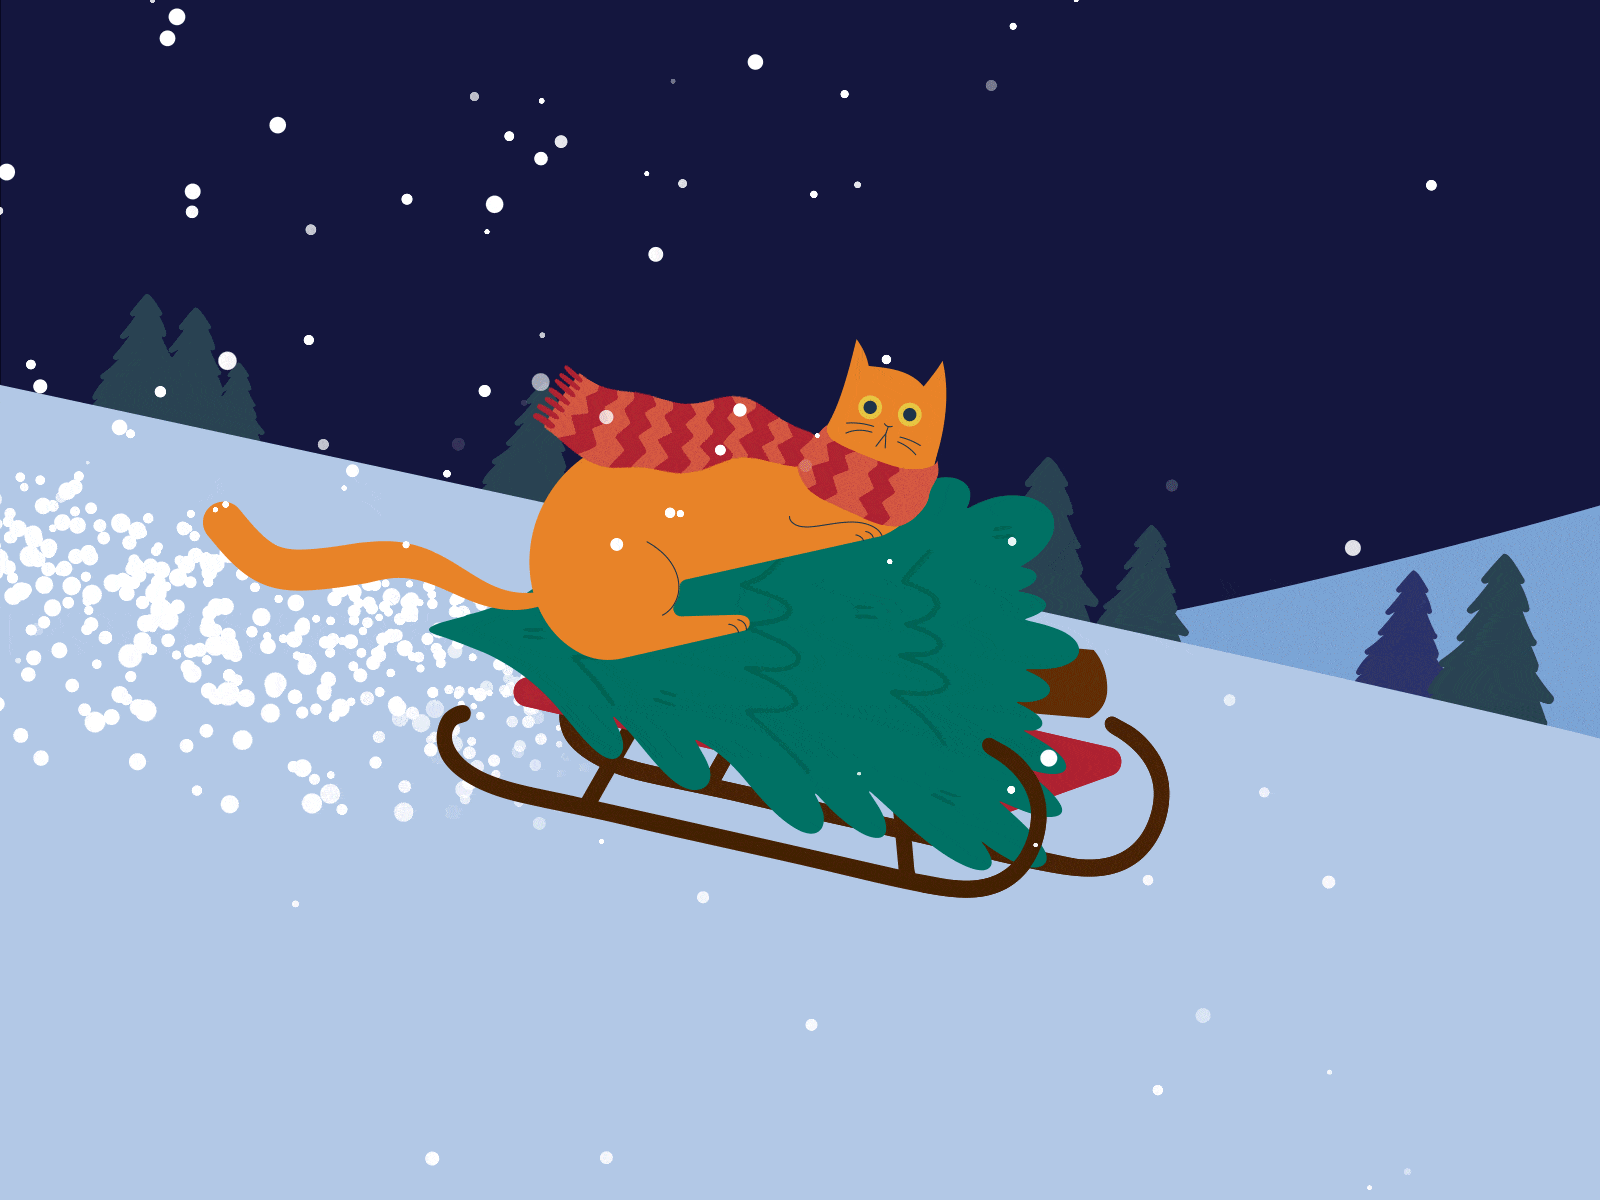 Sled away your sadness. It’s snow time! 2d animation cat happy holidays illustration loop motion design motion graphics sled sledding snow winter time